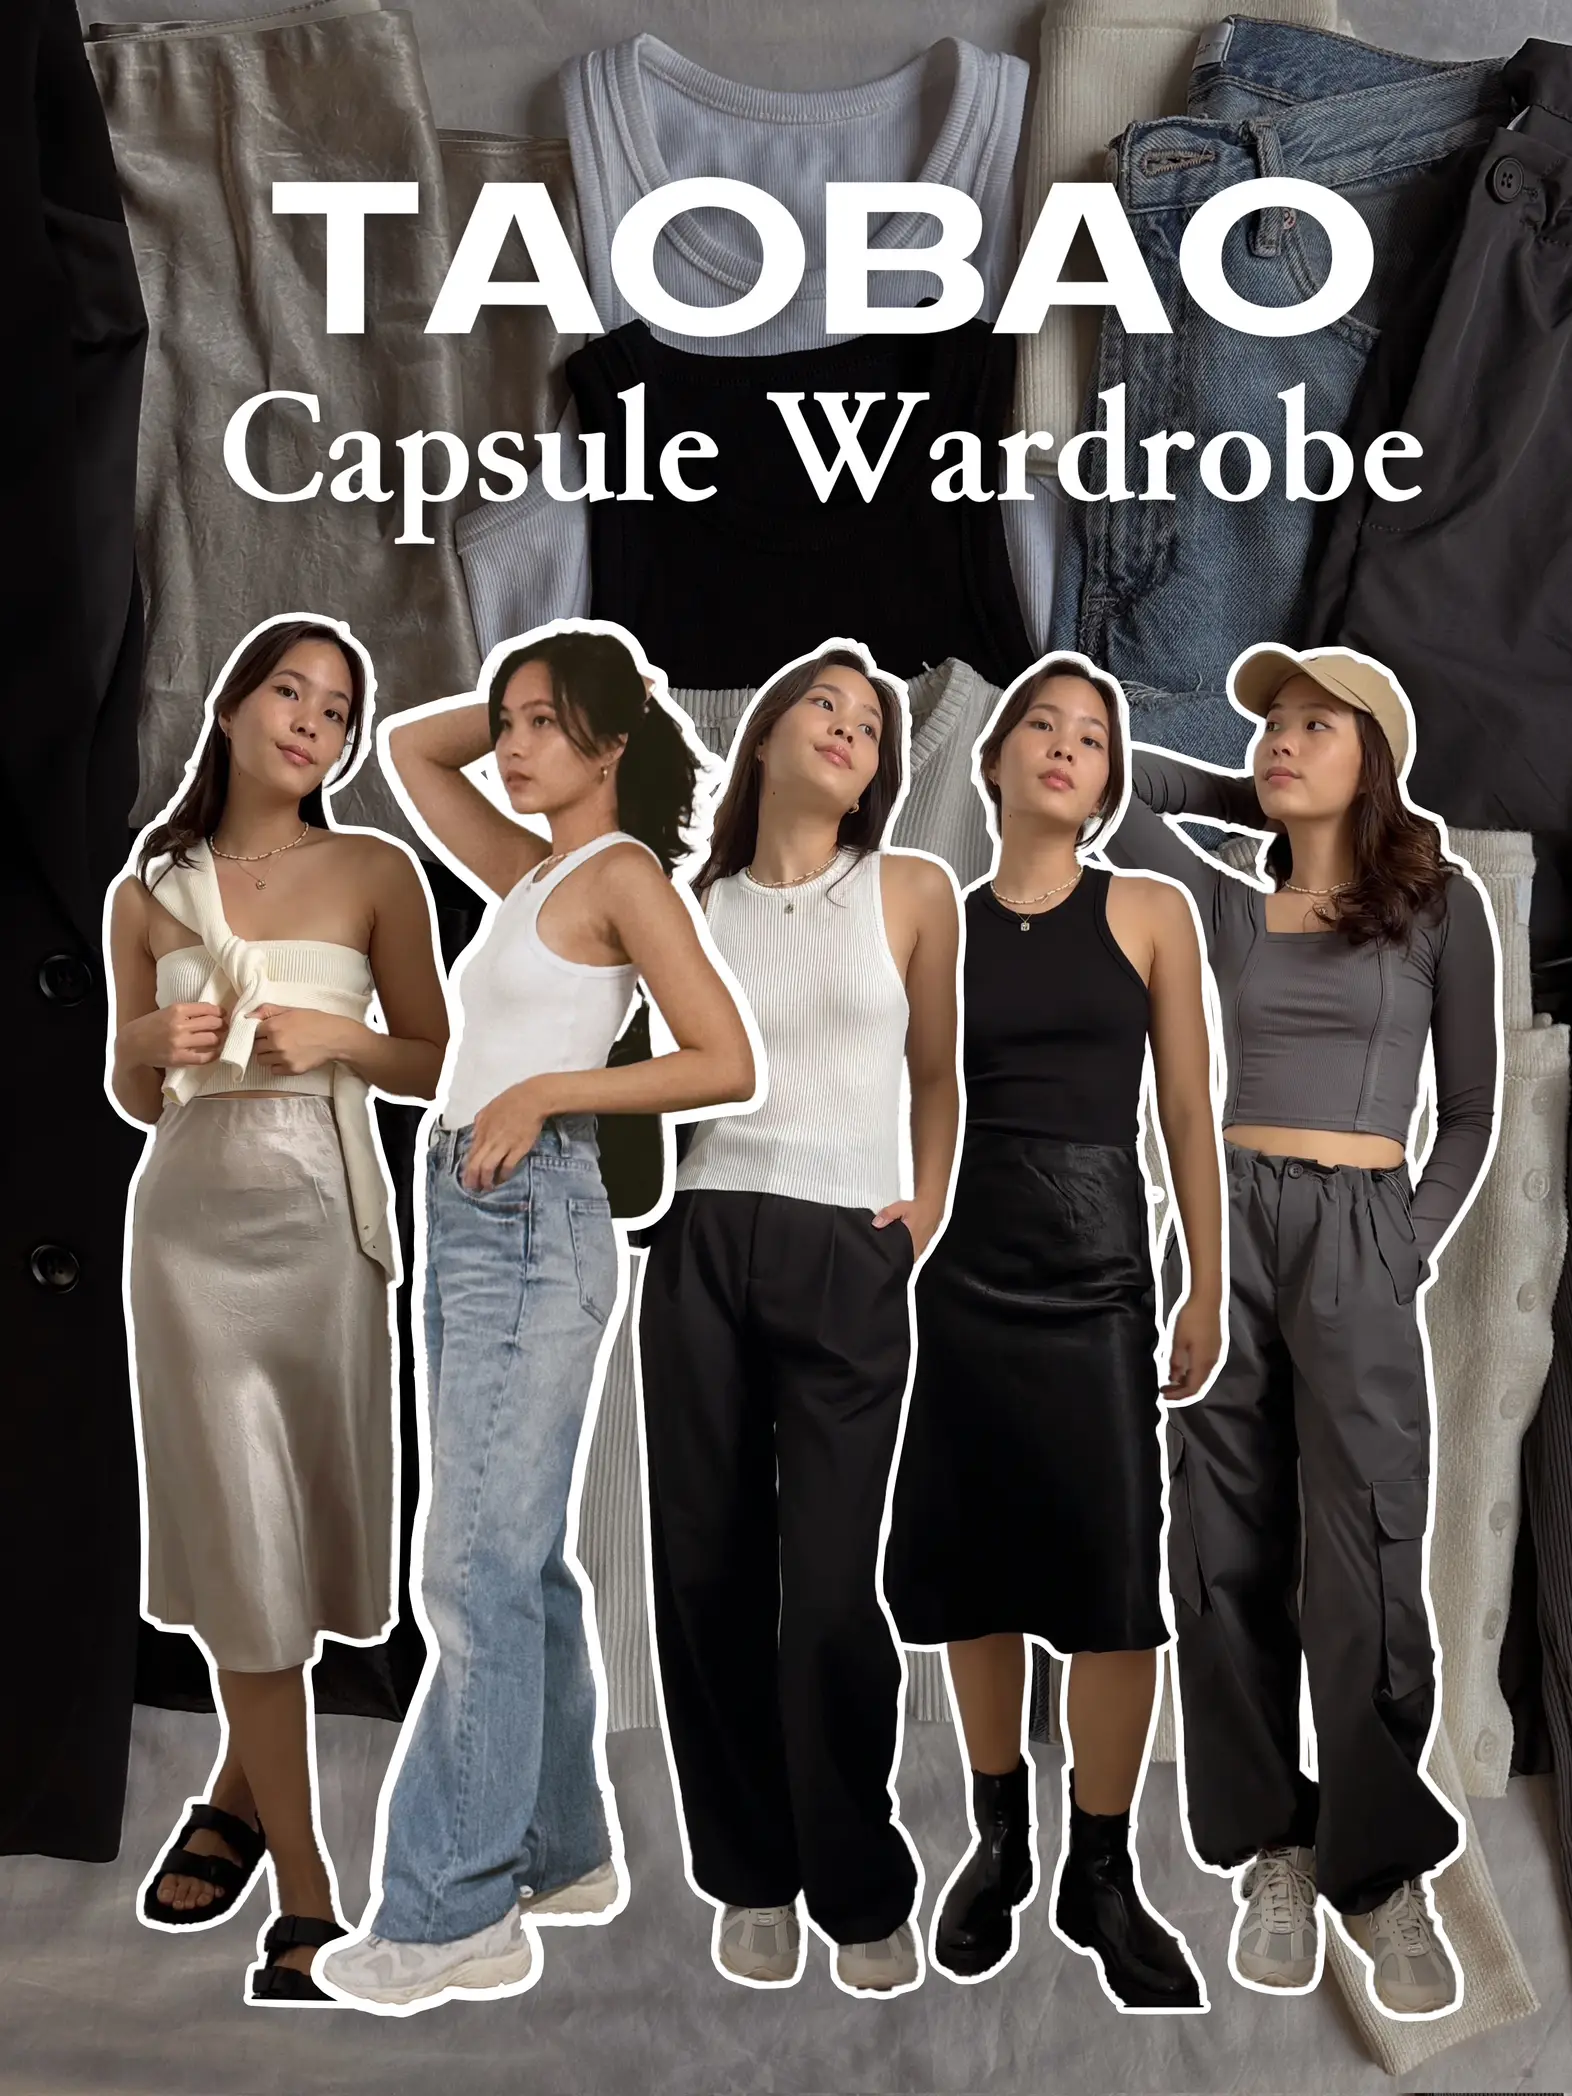 CAPSULE WARDROBE MUST-HAVES FROM TAOBAO 🤩, Gallery posted by joyzels